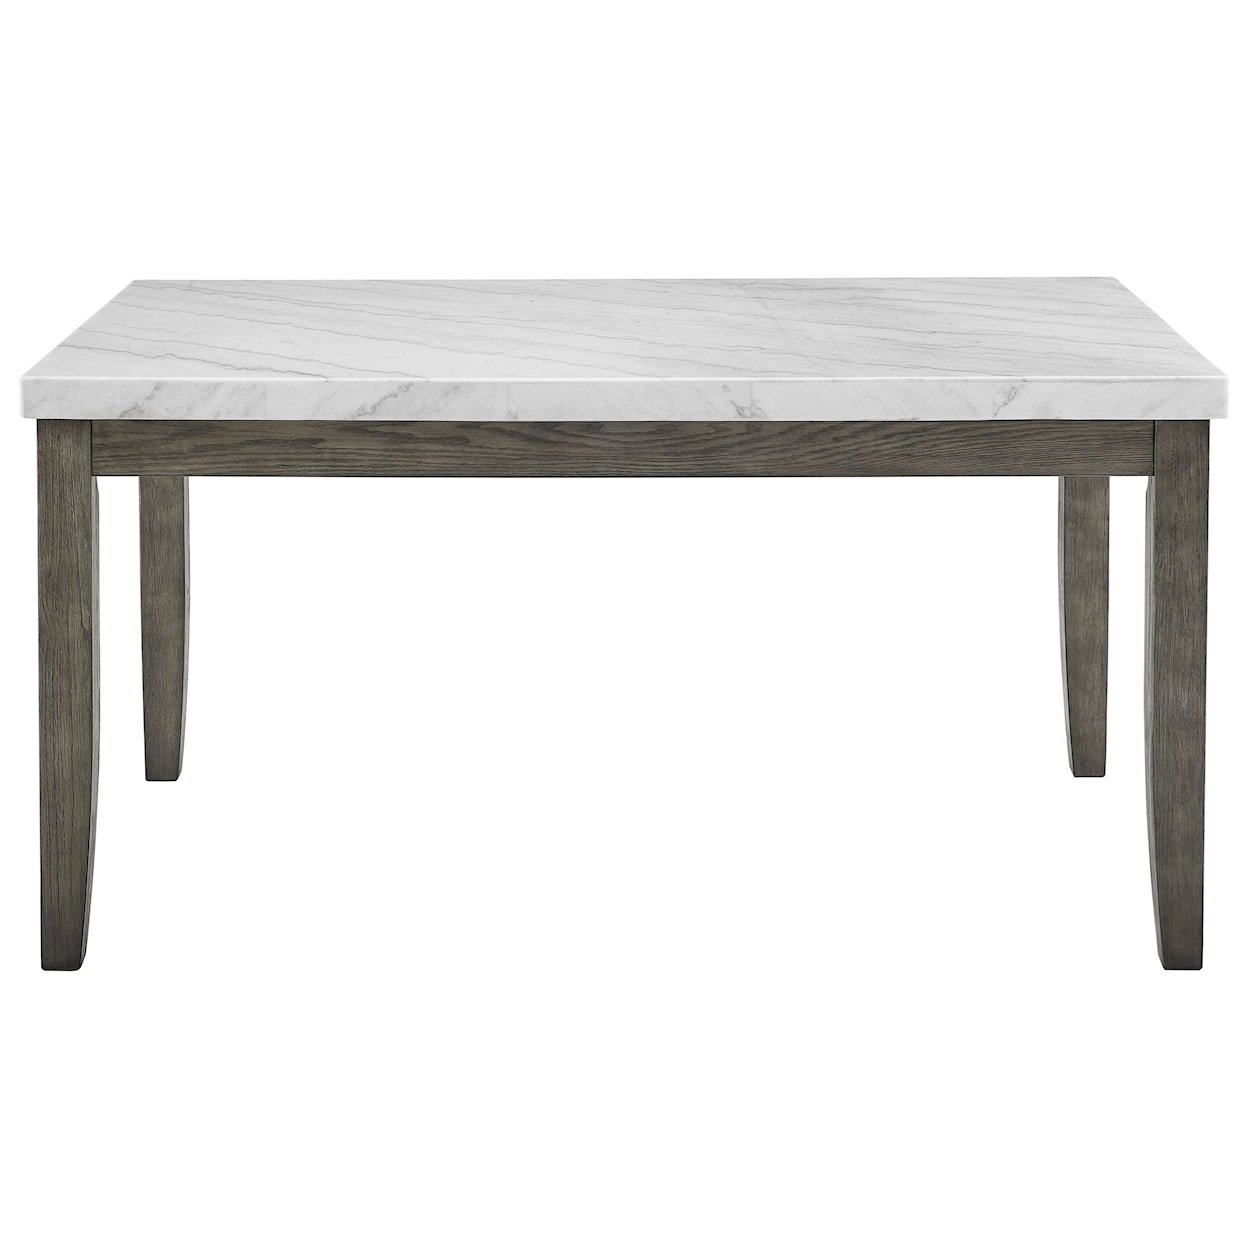 Belfort Essentials Emily White Marble Top Dining Table